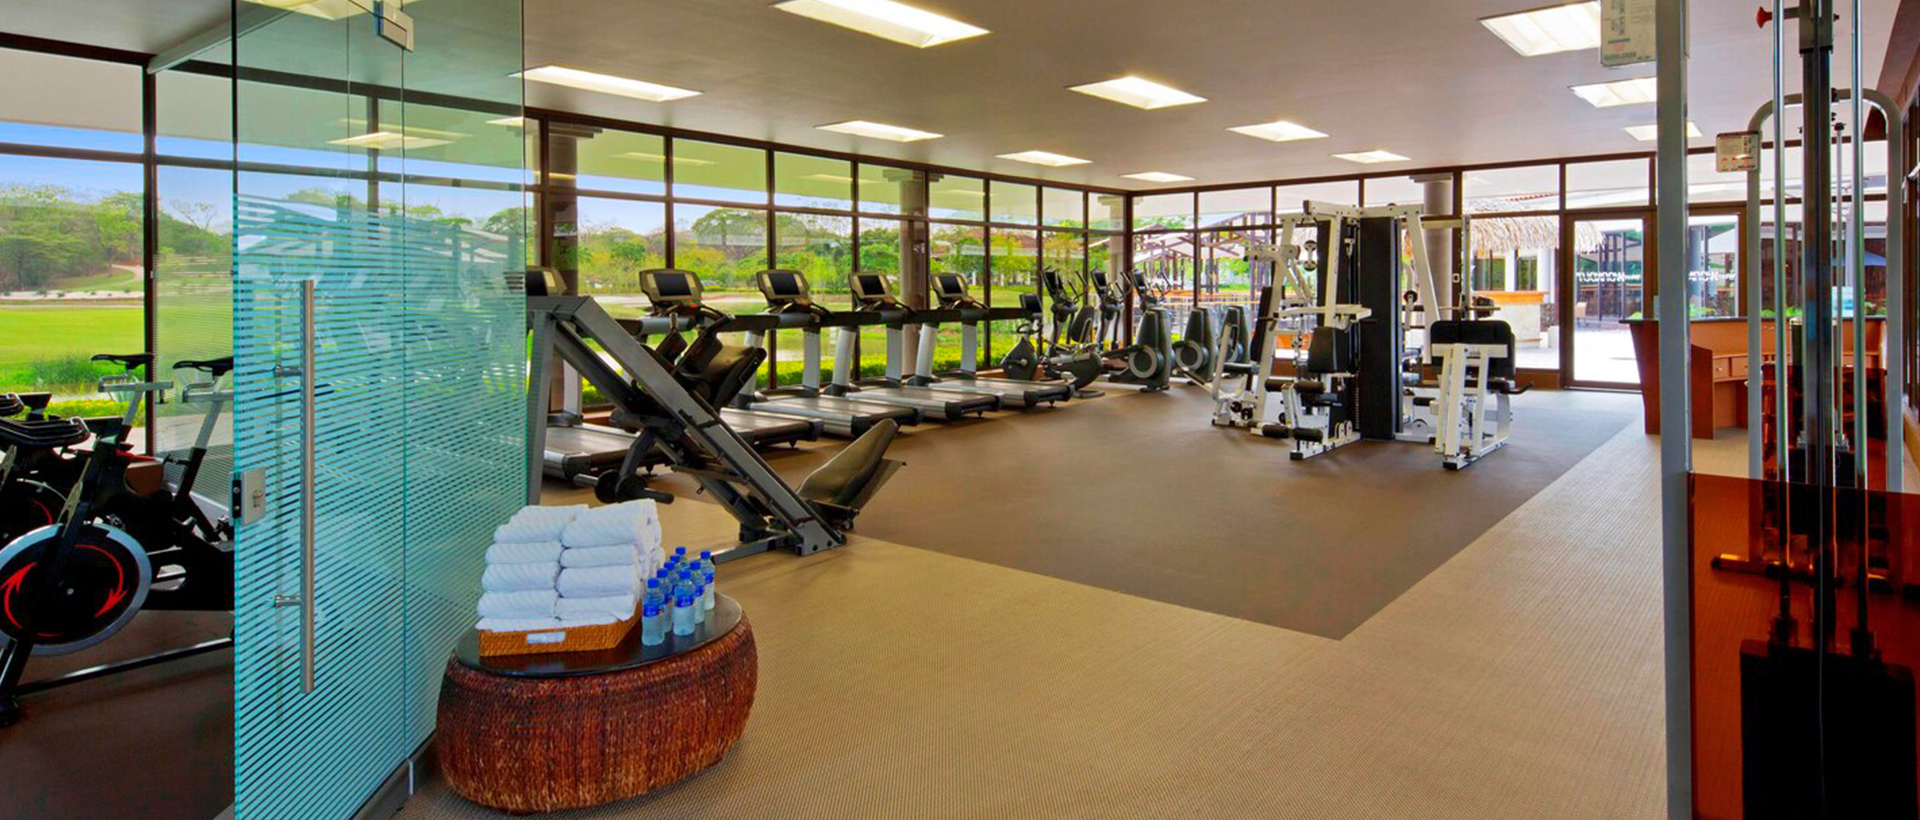 Westin WORKOUT® Fitness Studio at The Westin Reserva